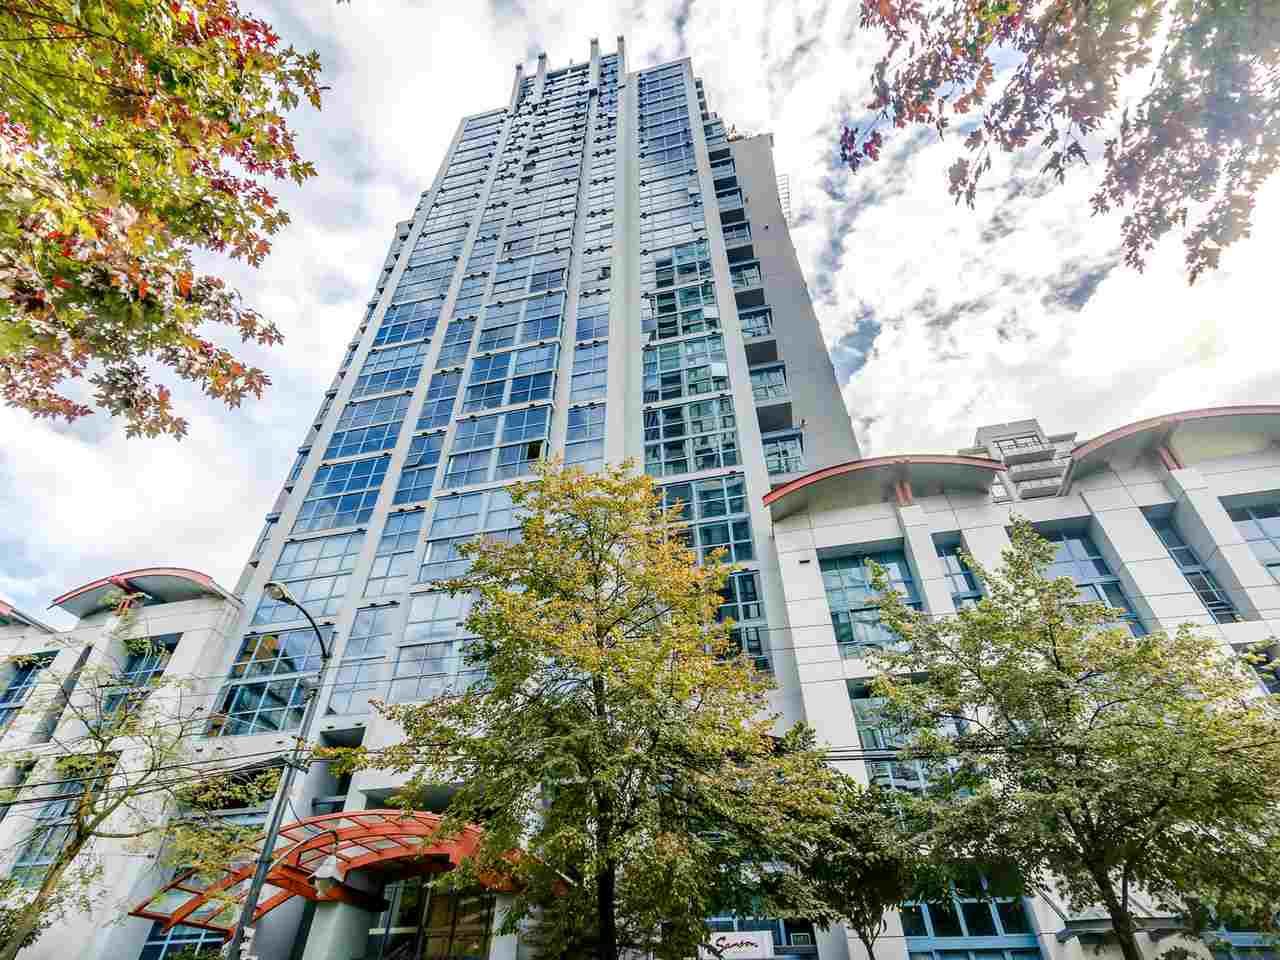 Main Photo: 905 1238 SEYMOUR STREET in : Downtown VW Condo for sale : MLS®# R2003623